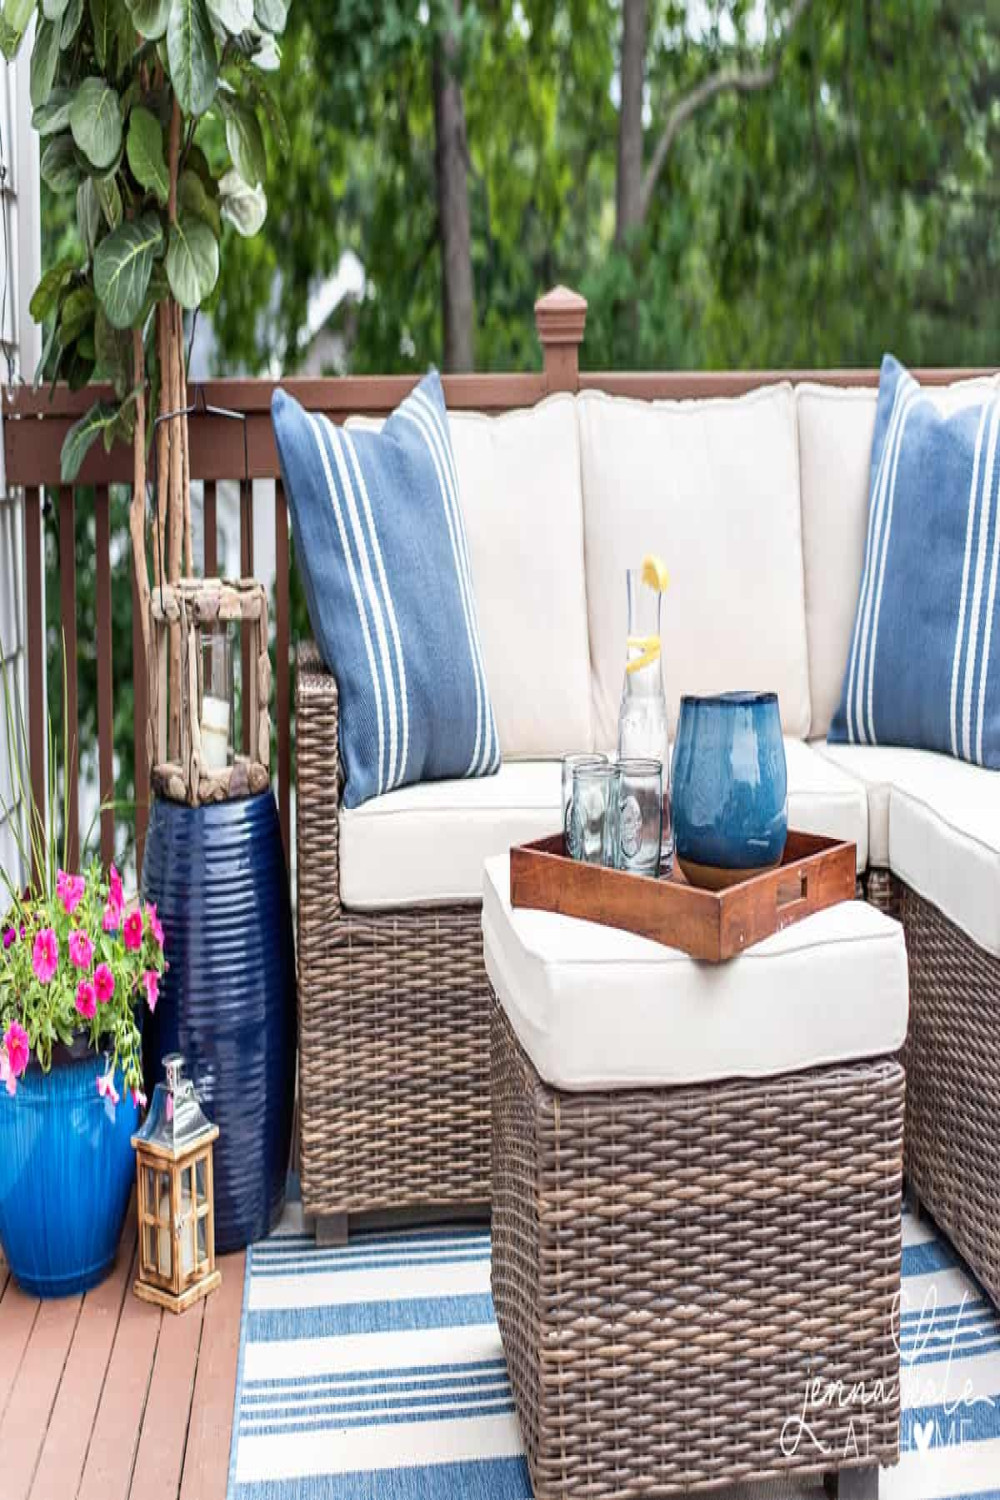 Small Deck Decorating Ideas: Simple Tips For Creating A Backyard Oasis